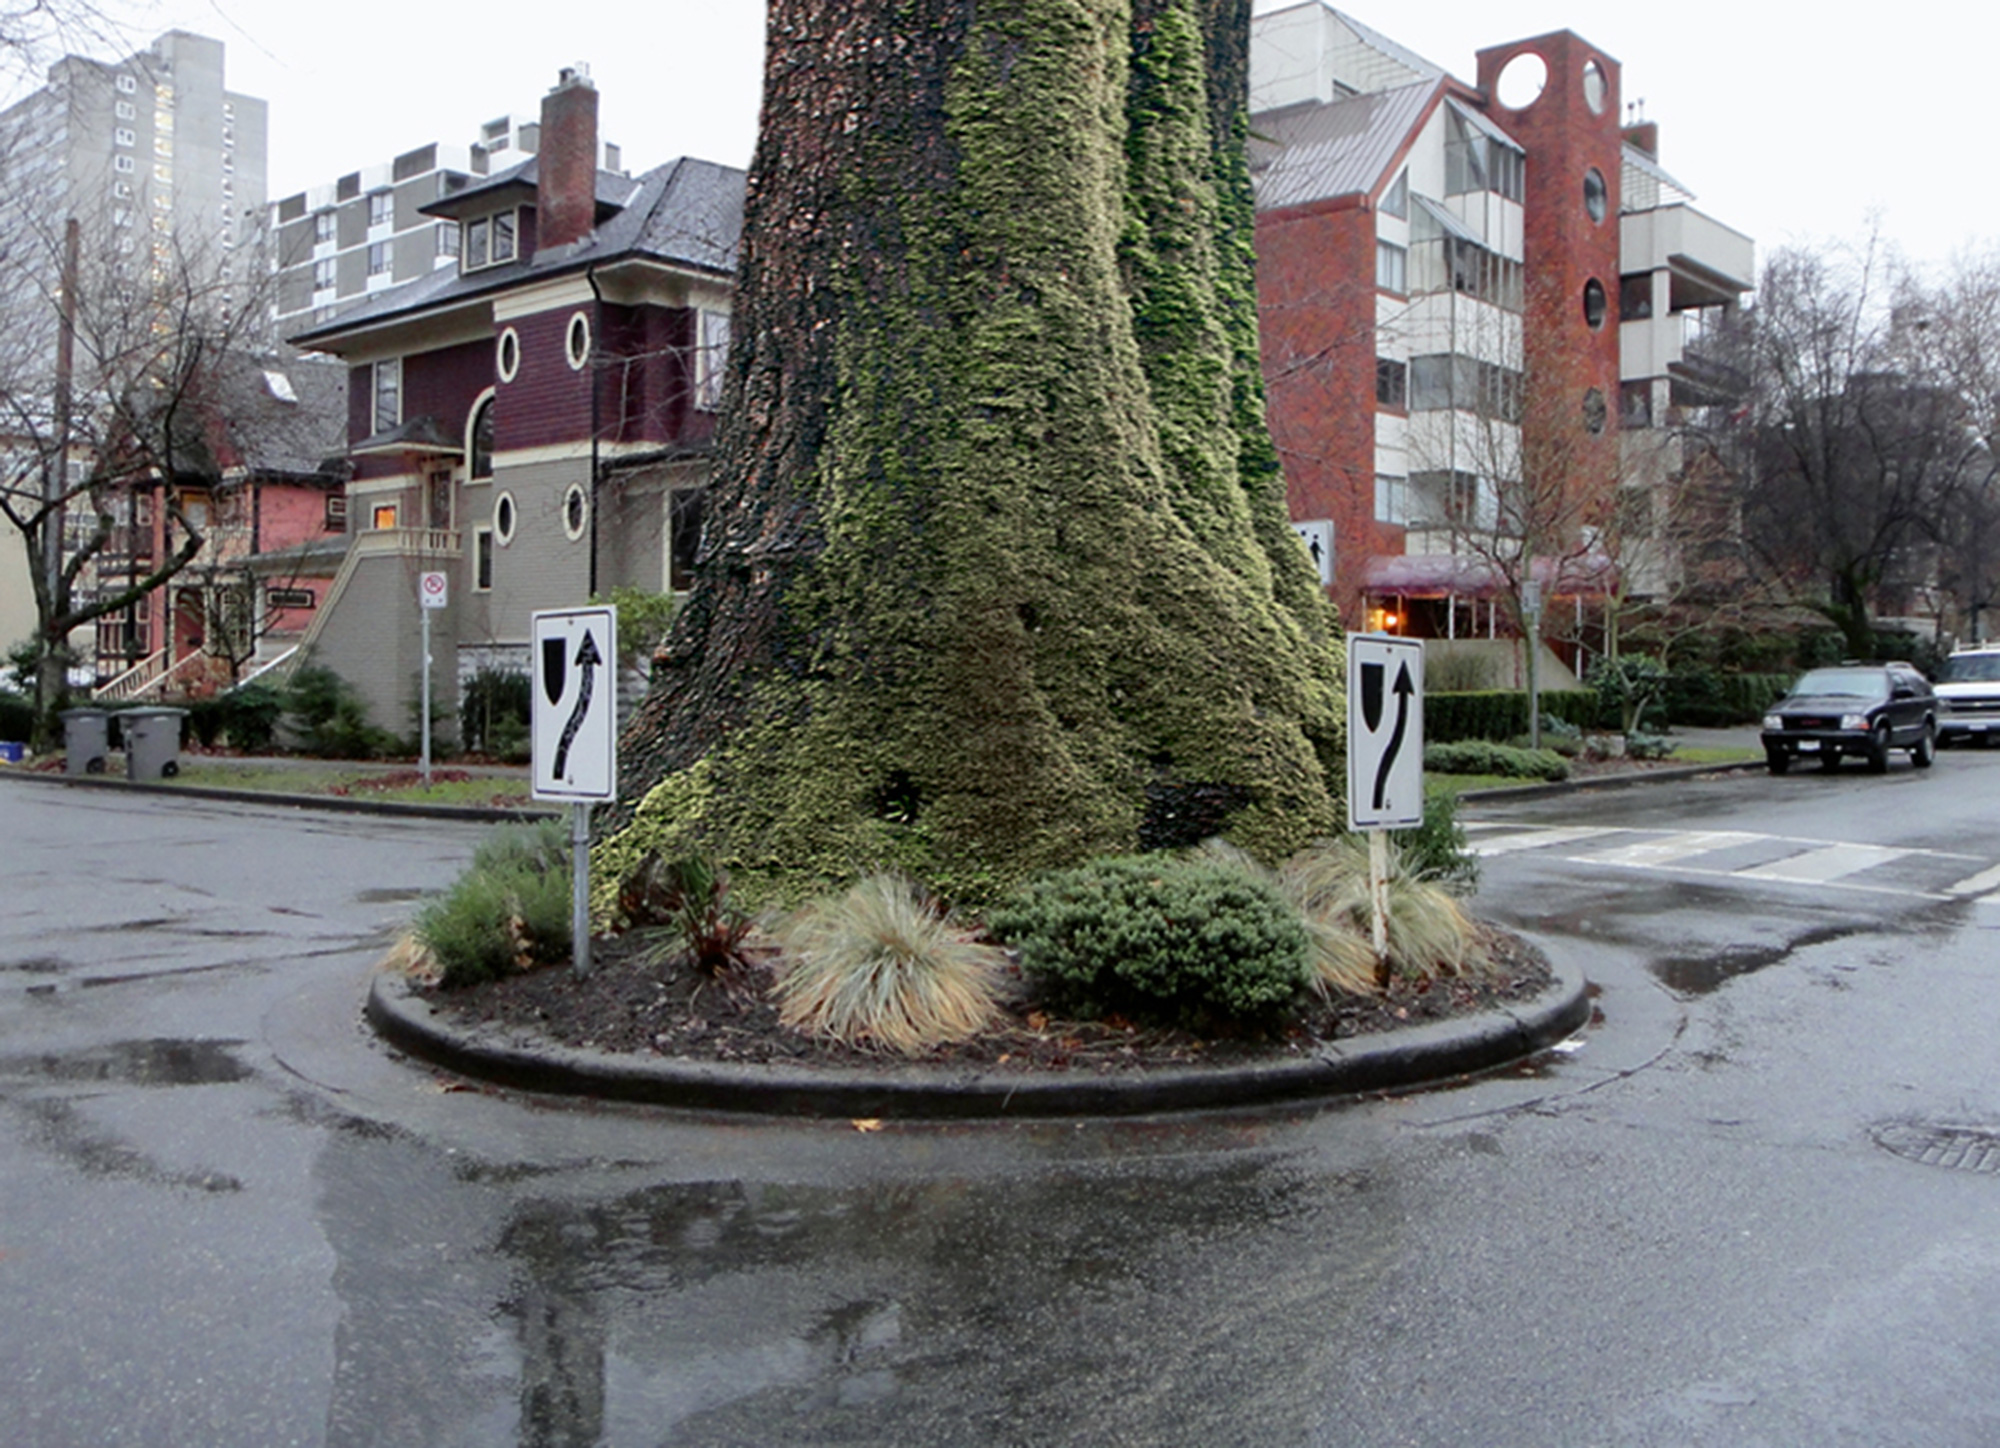 A photograph titled “Roundabout Vancouver: Bidwell and Nelson, circa twenty ten” It shows a moss-covered tree in the center of a traffic roundabout.